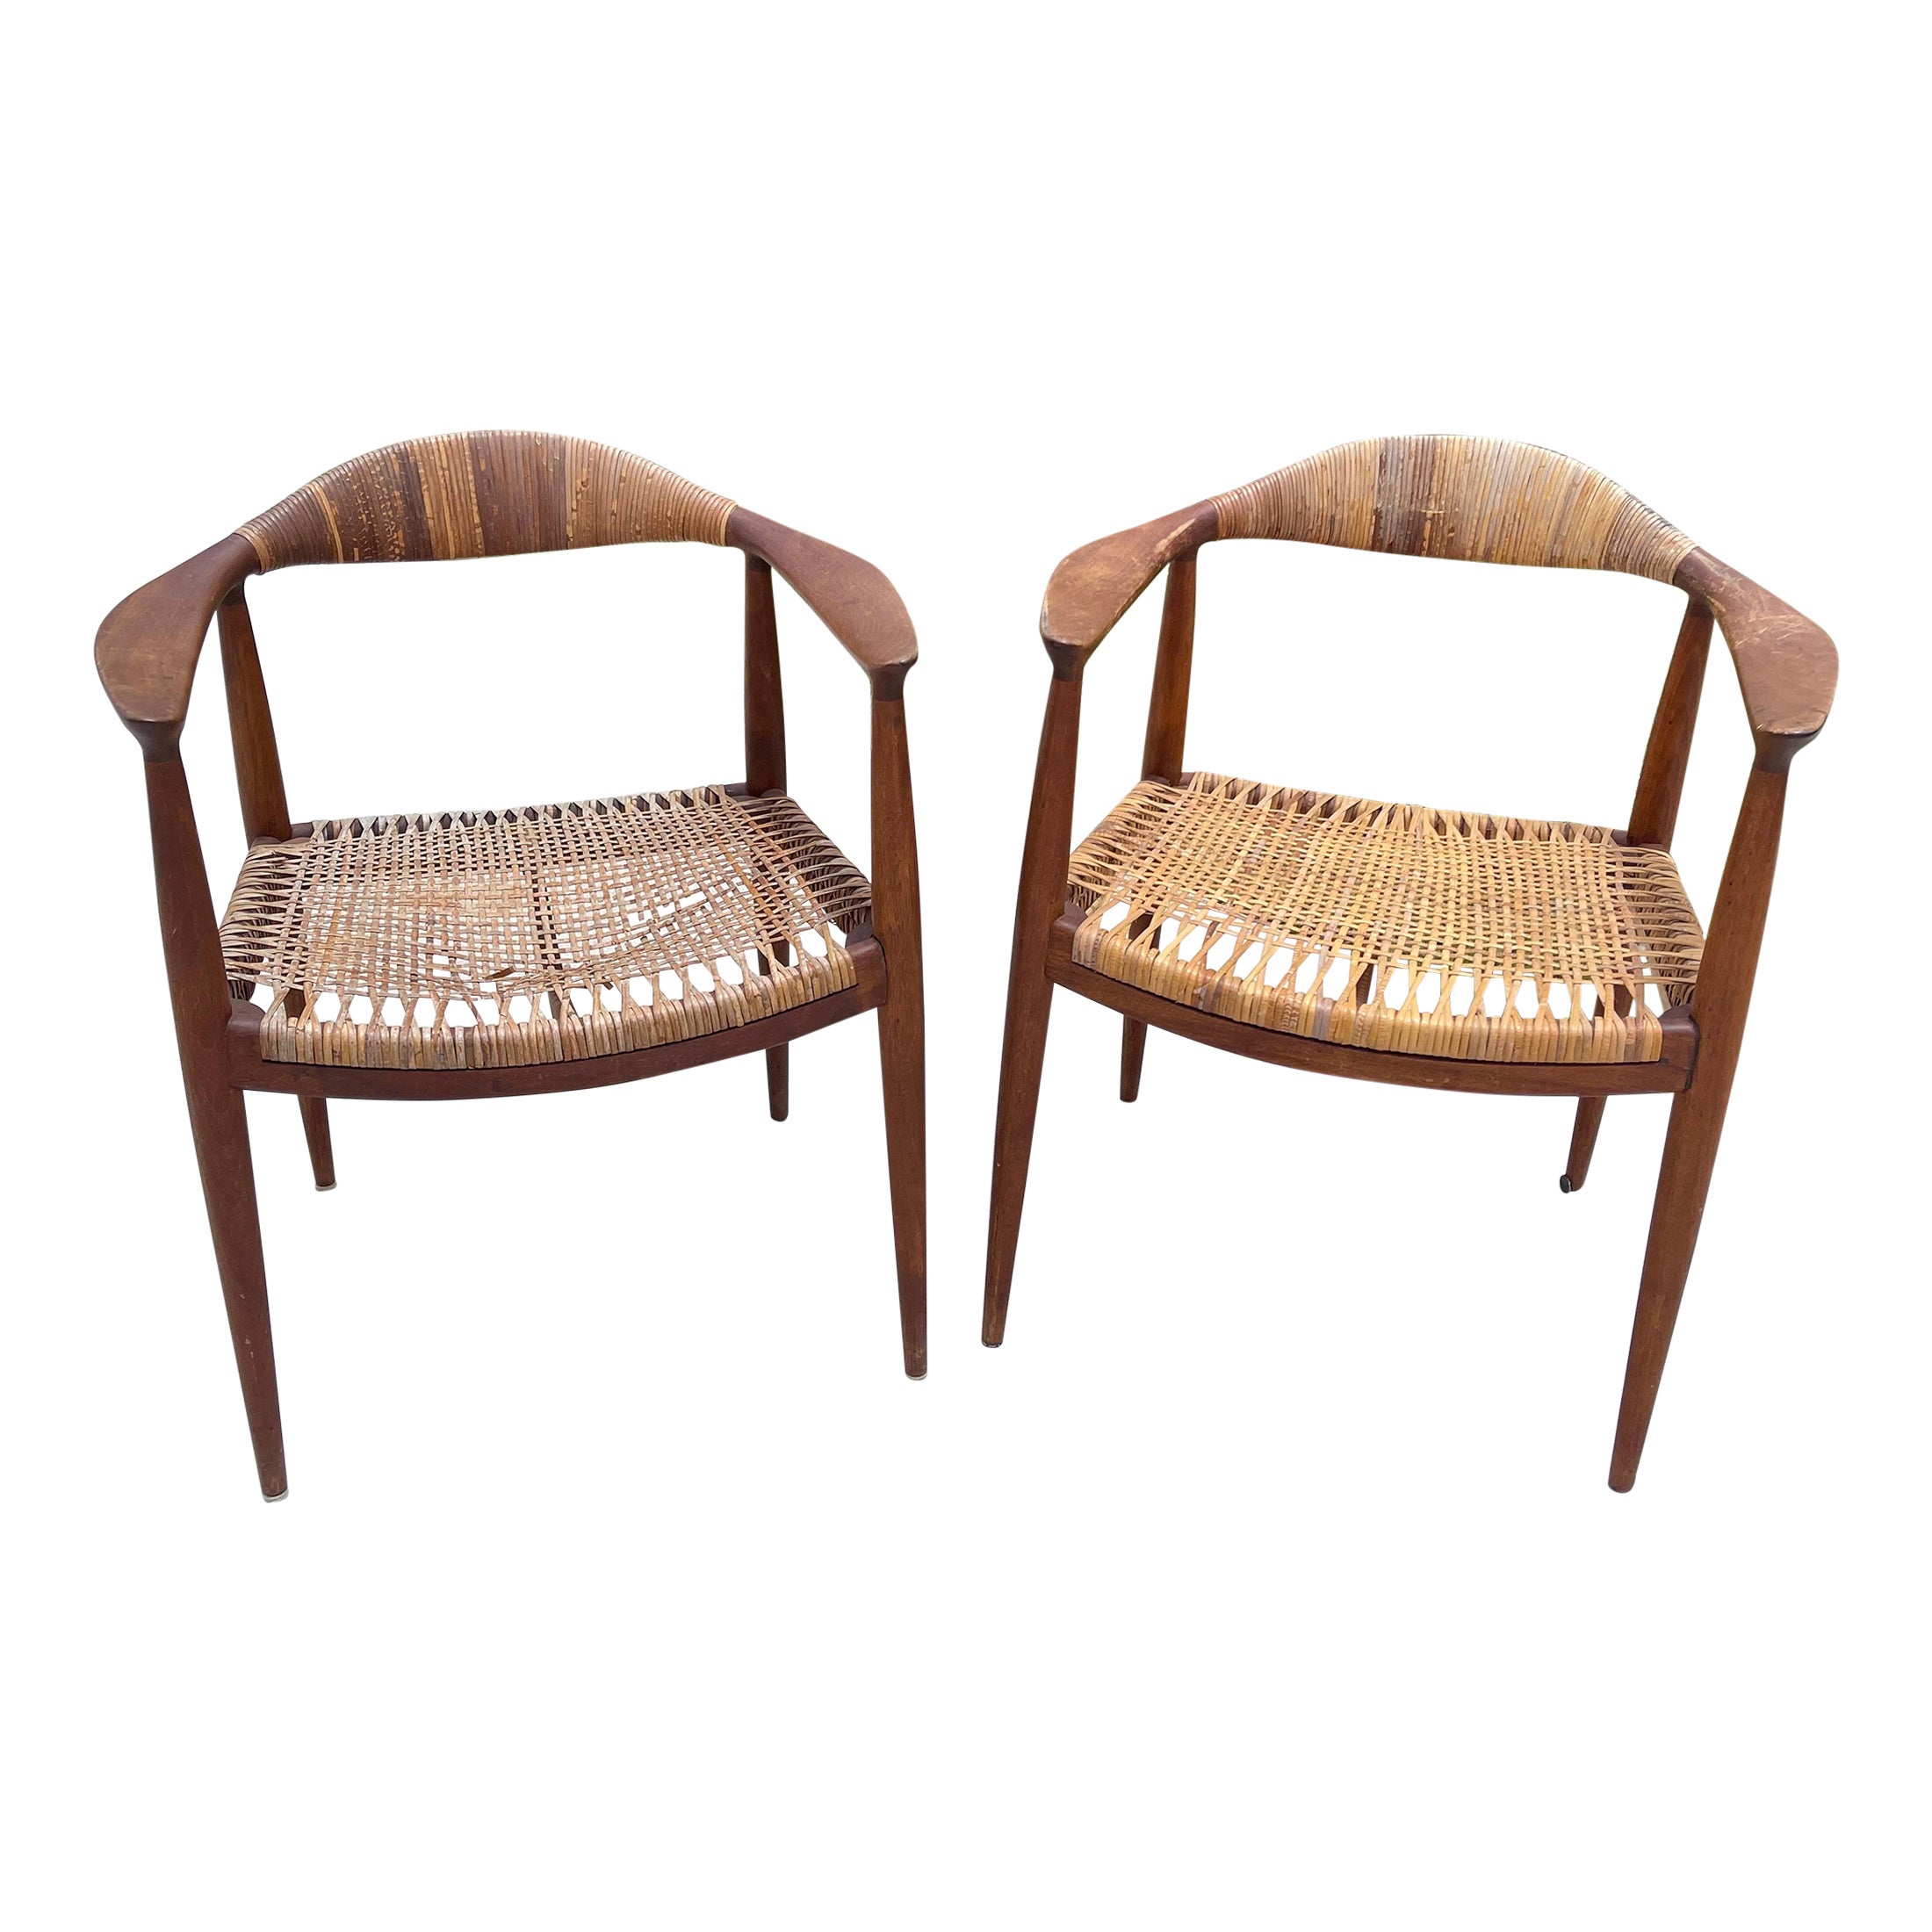 Hans Wegner “The Chair” Early Example Teak, Cane Armchairs, a Pair For Sale